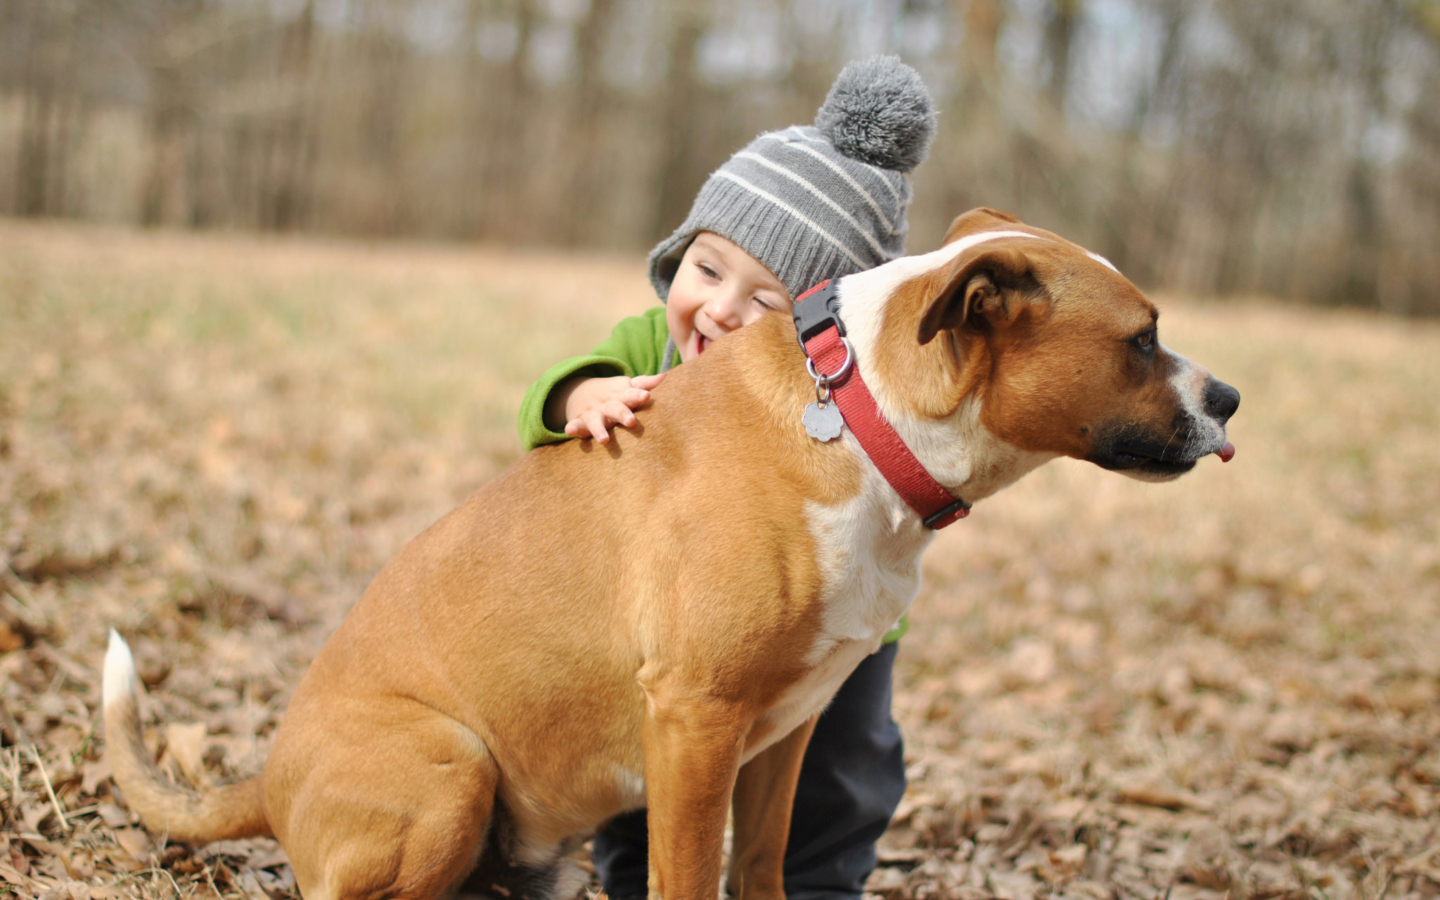 Child With His Dog Friend wallpaper 1440x900